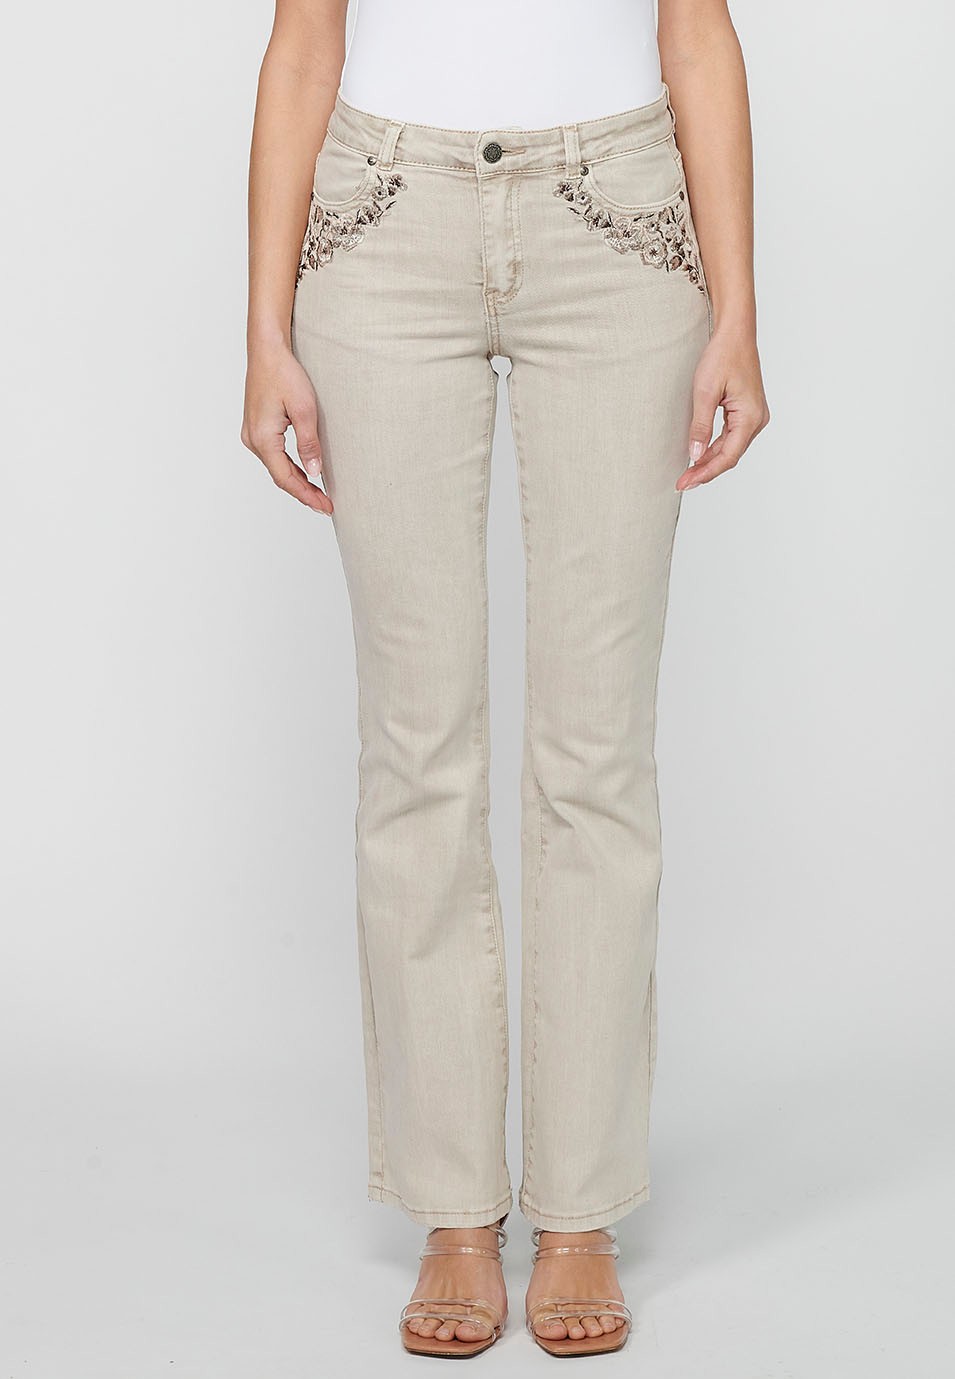 Long bell bottom pants with front zipper closure in Beige for Women 3